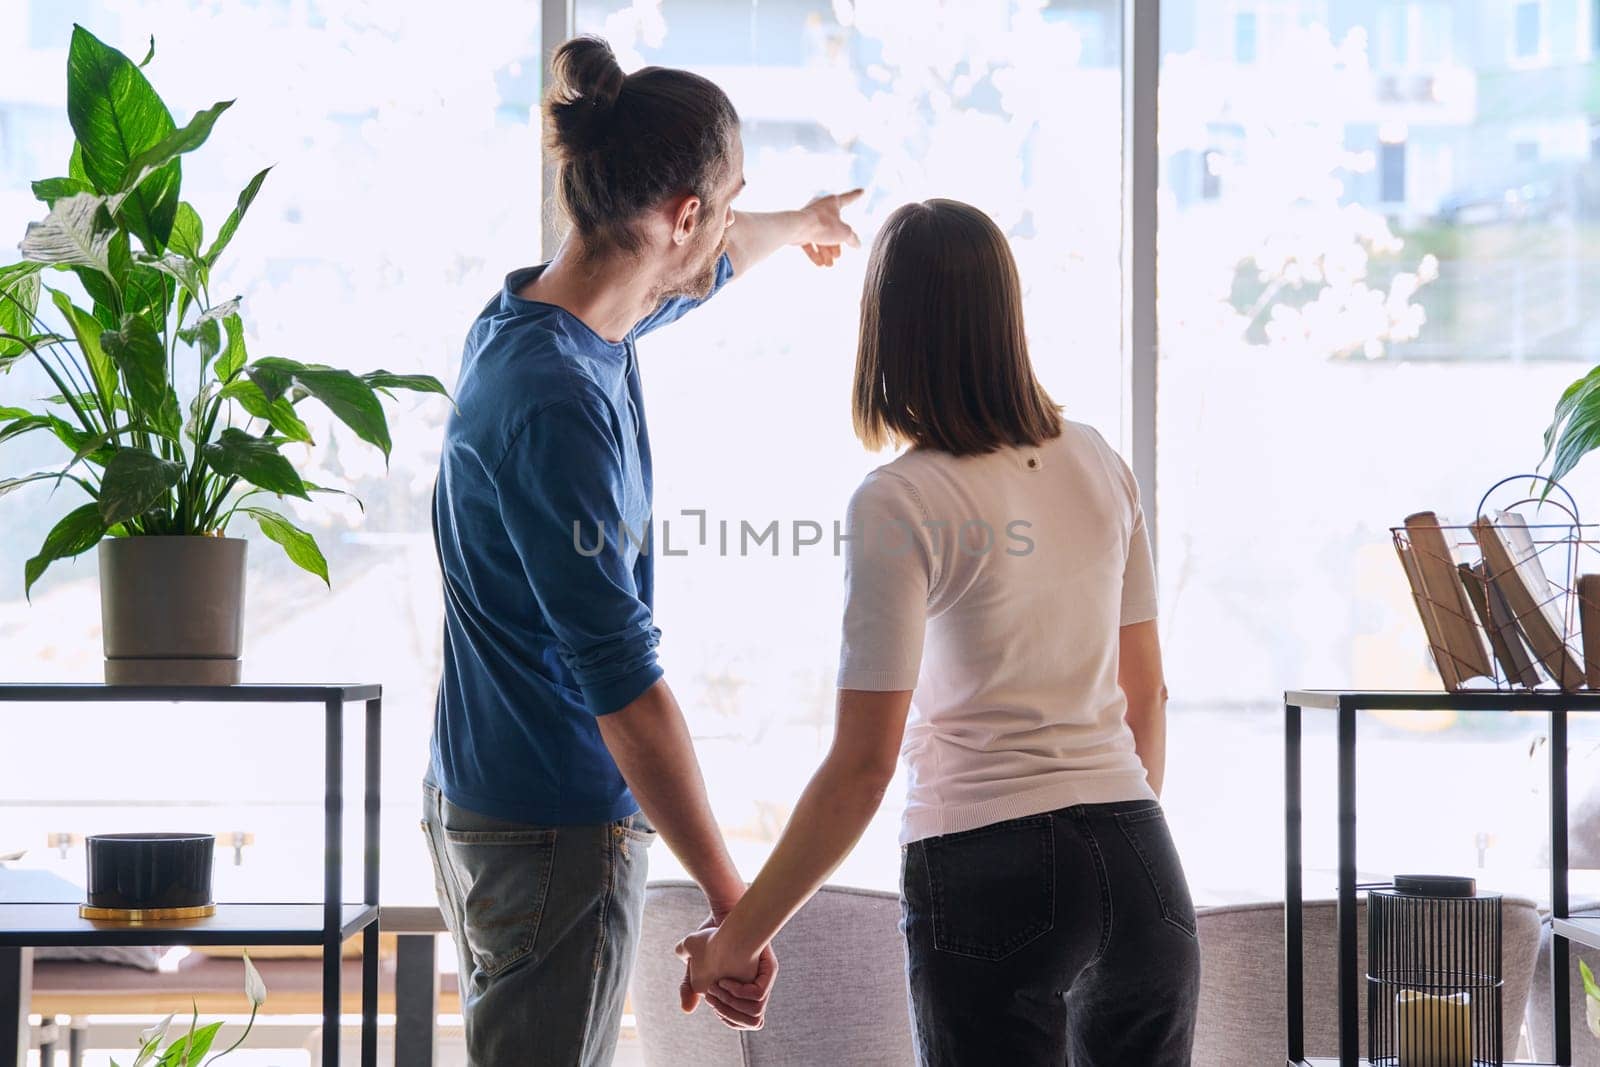 Back view, silhouette of young couple holding hands looking out window. Love friendship romance relationship, happiness, lifestyle, people concept